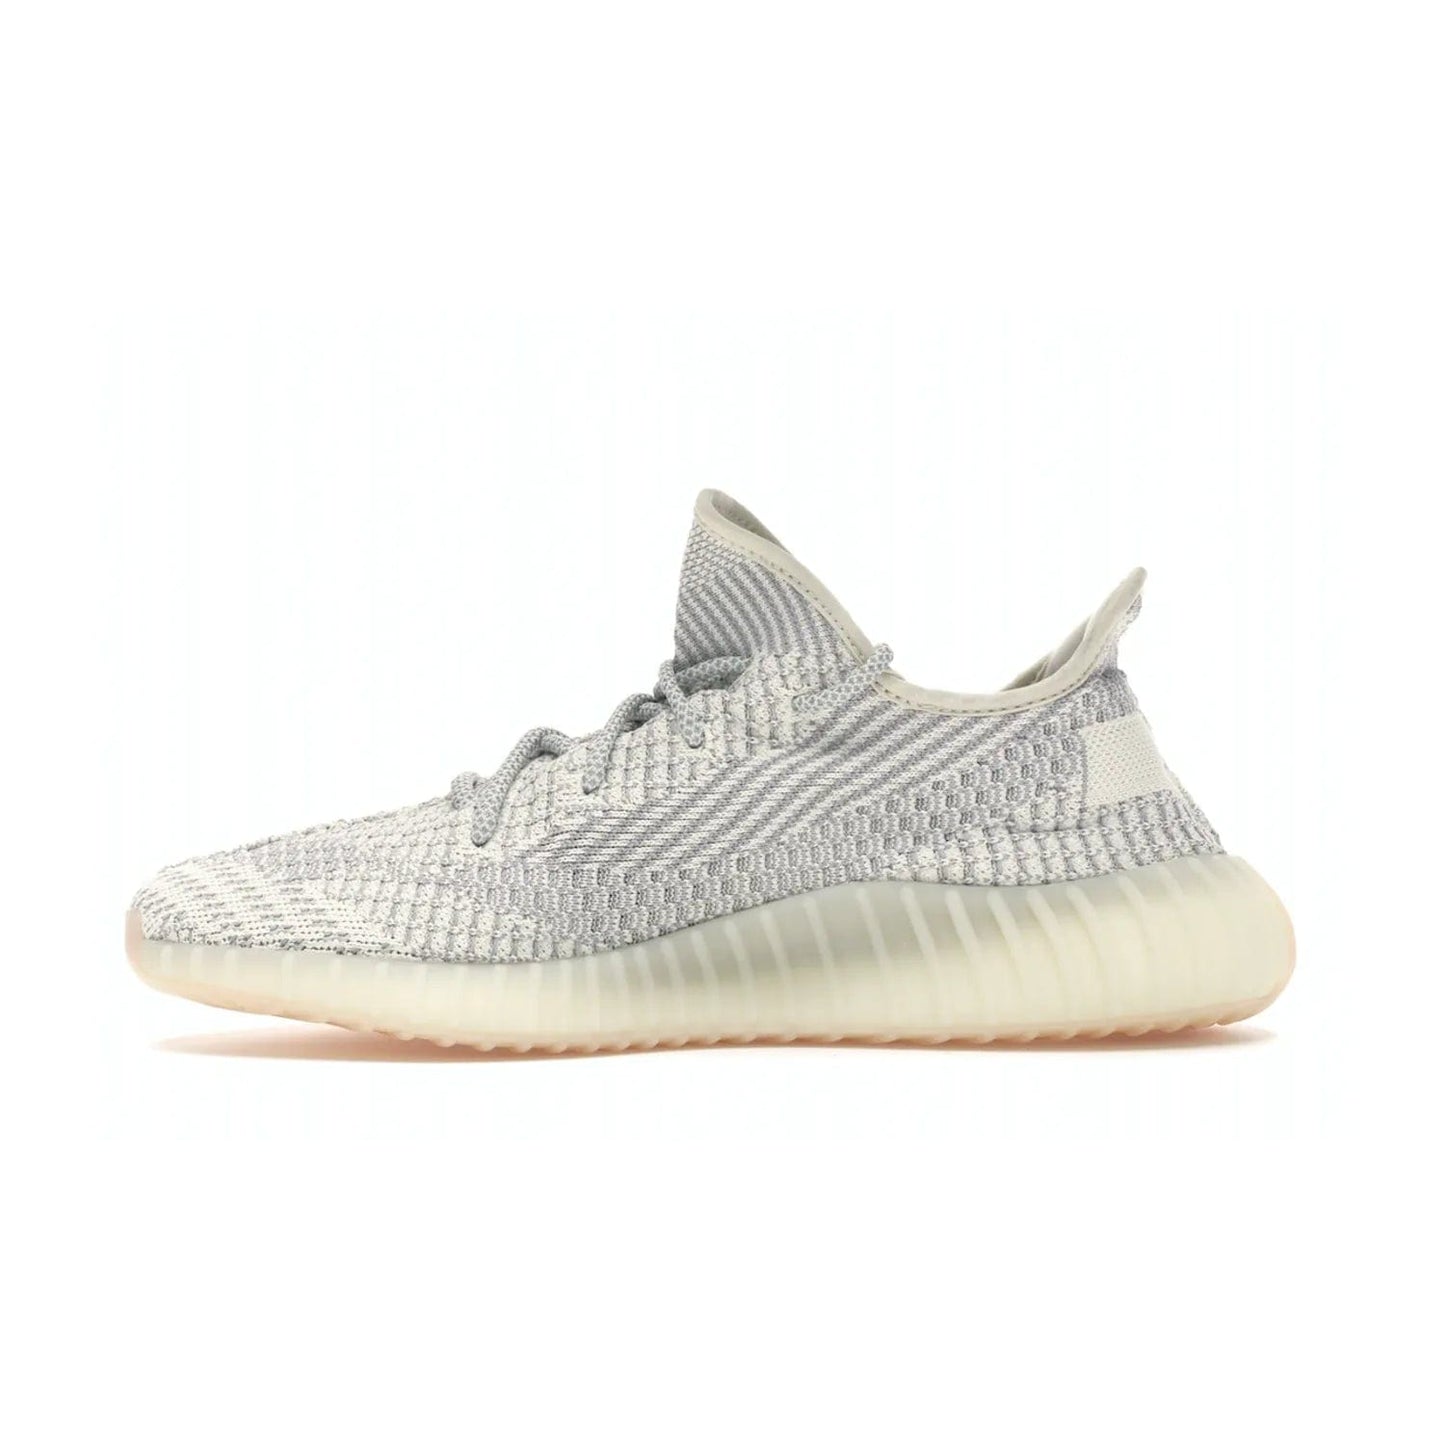 adidas Yeezy Boost 350 V2 Lundmark (Non Reflective) - Image 19 - Only at www.BallersClubKickz.com - Shop the exclusive adidas Yeezy Boost 350 V2 Lundmark with a subtle summer color, mesh upper, white-to-cream transitional midsole, light tan outsole, and pink middle stripe. Comfort and style come together in this perfect summer 350 V2. Released on July 11, 2019.